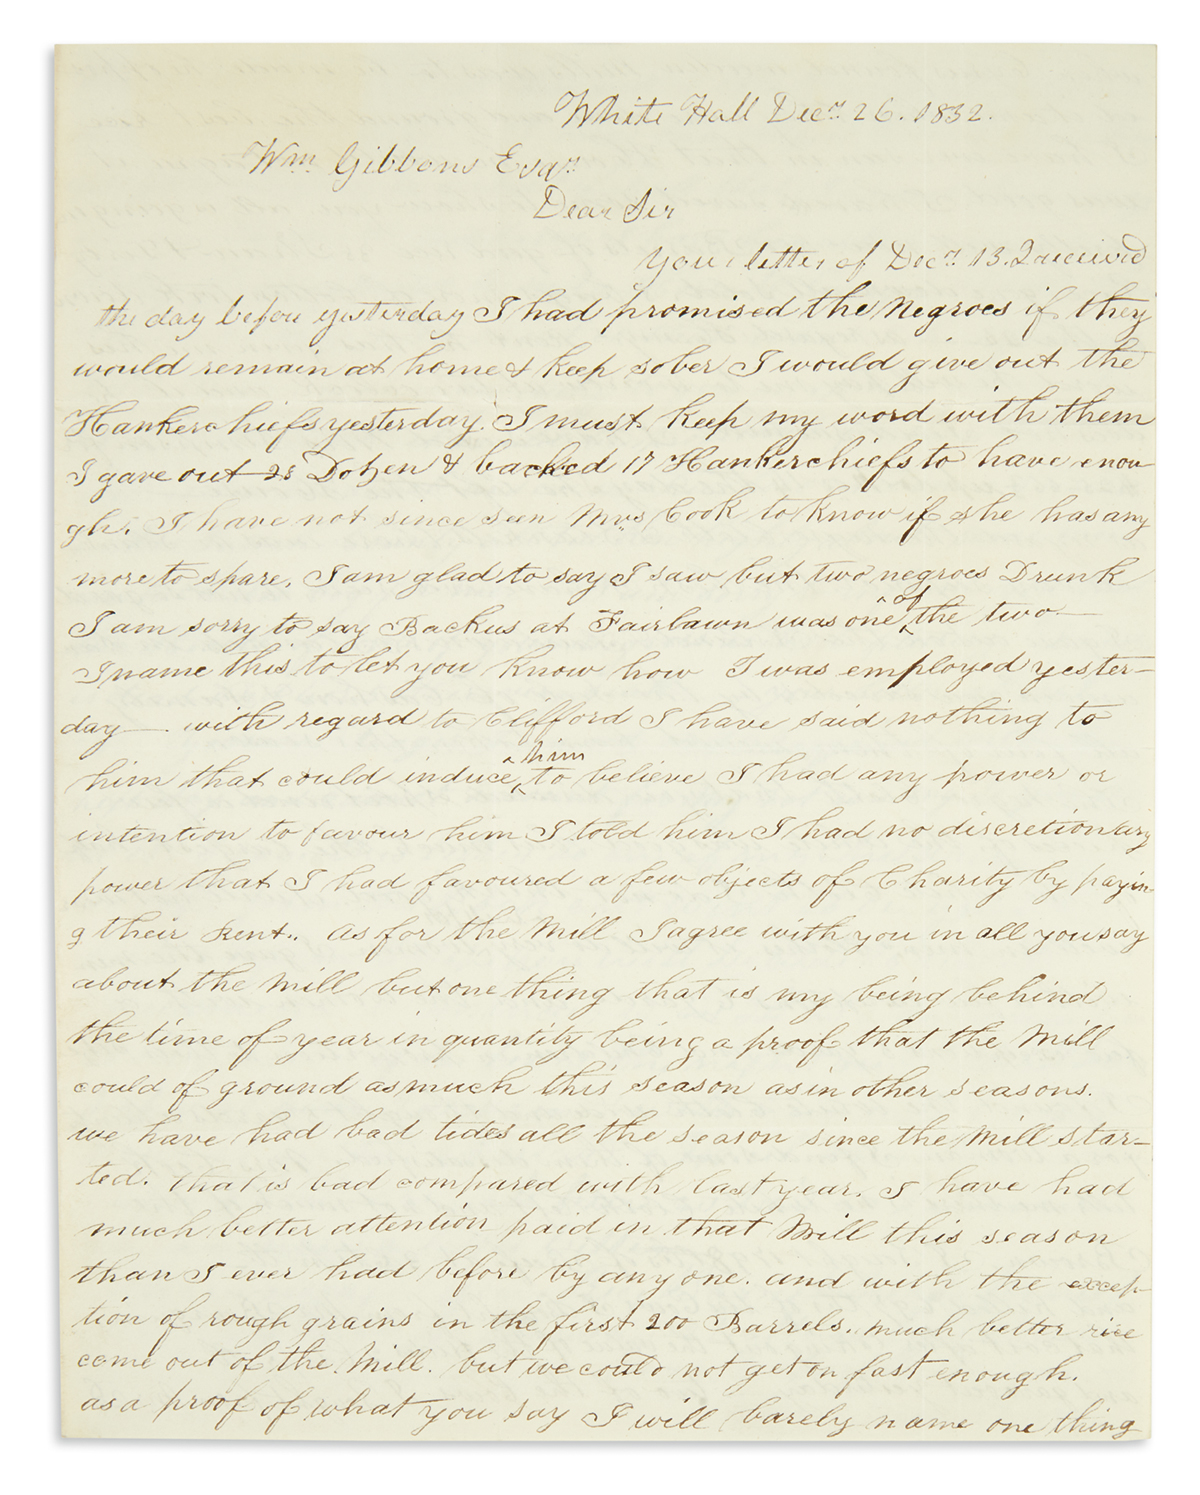 (SLAVERY AND ABOLITION.) Dunham, William. An overseers letter describing a bleak Christmas on the plantation.